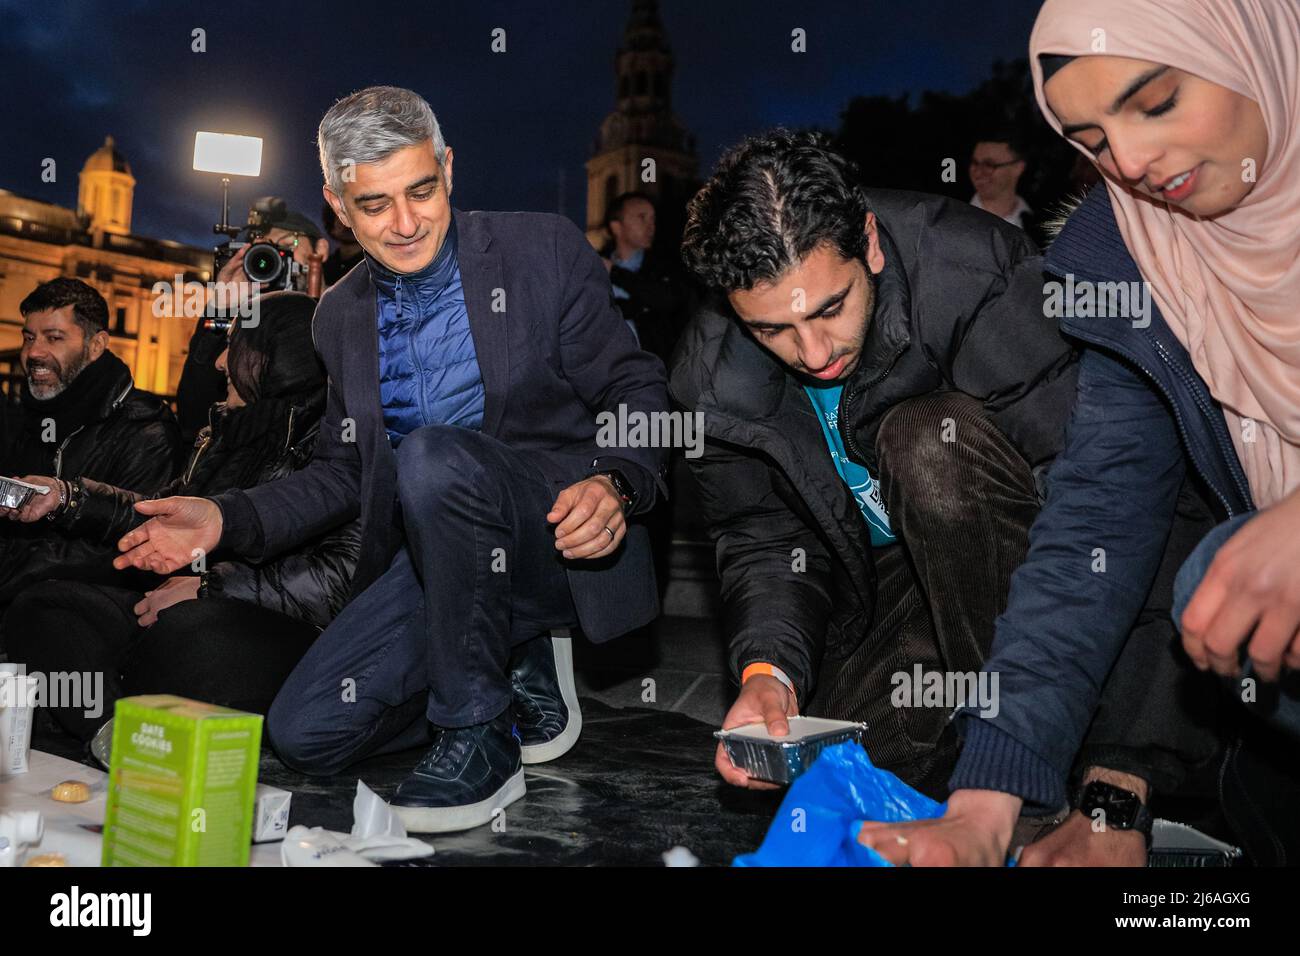 London, UK, 29th April 2022. Mayor of London Sadiq Khan helps to distribute meals down the rows of seated diners. The UK's largest Open Iftar, organised bz Ramadan Tent Project, brings together people from all communities to share an Iftar (evening meal) to break fast during what is now the final week of the Islamic holy month of Ramadan. The event is attended by Sadiq Khan, Mayor of London, and around 2,000 members of the public. Credit: Imageplotter/Alamy Live News Stock Photo